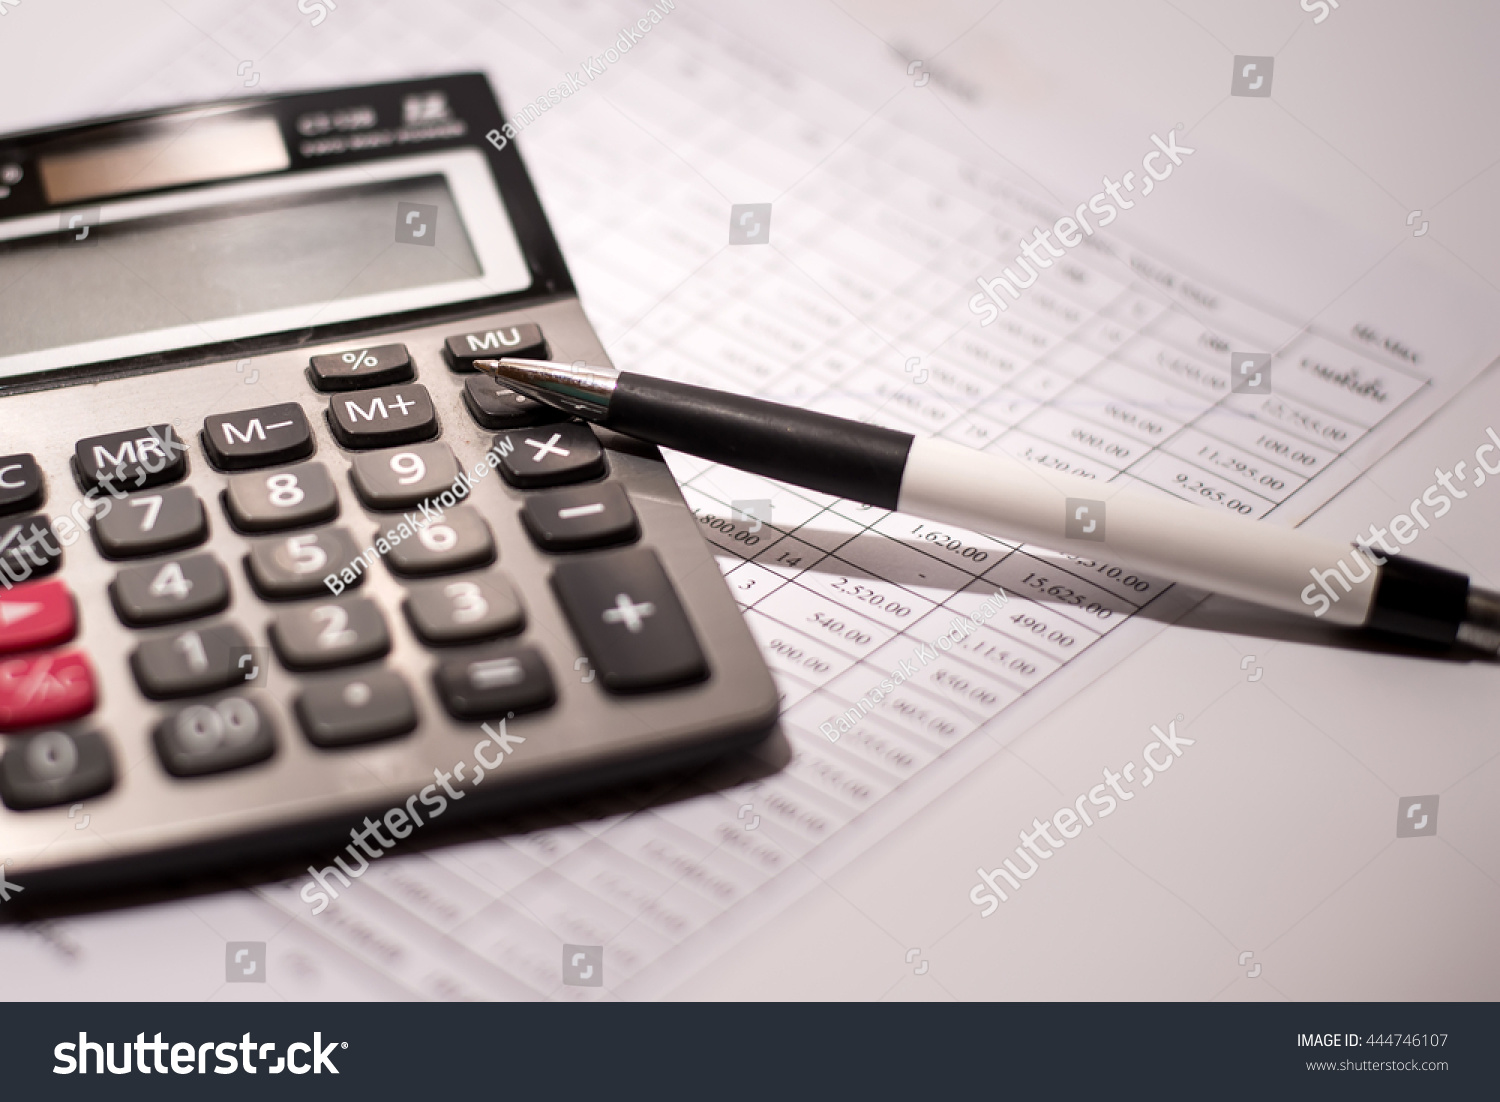 calculator and pen on a business background #444746107